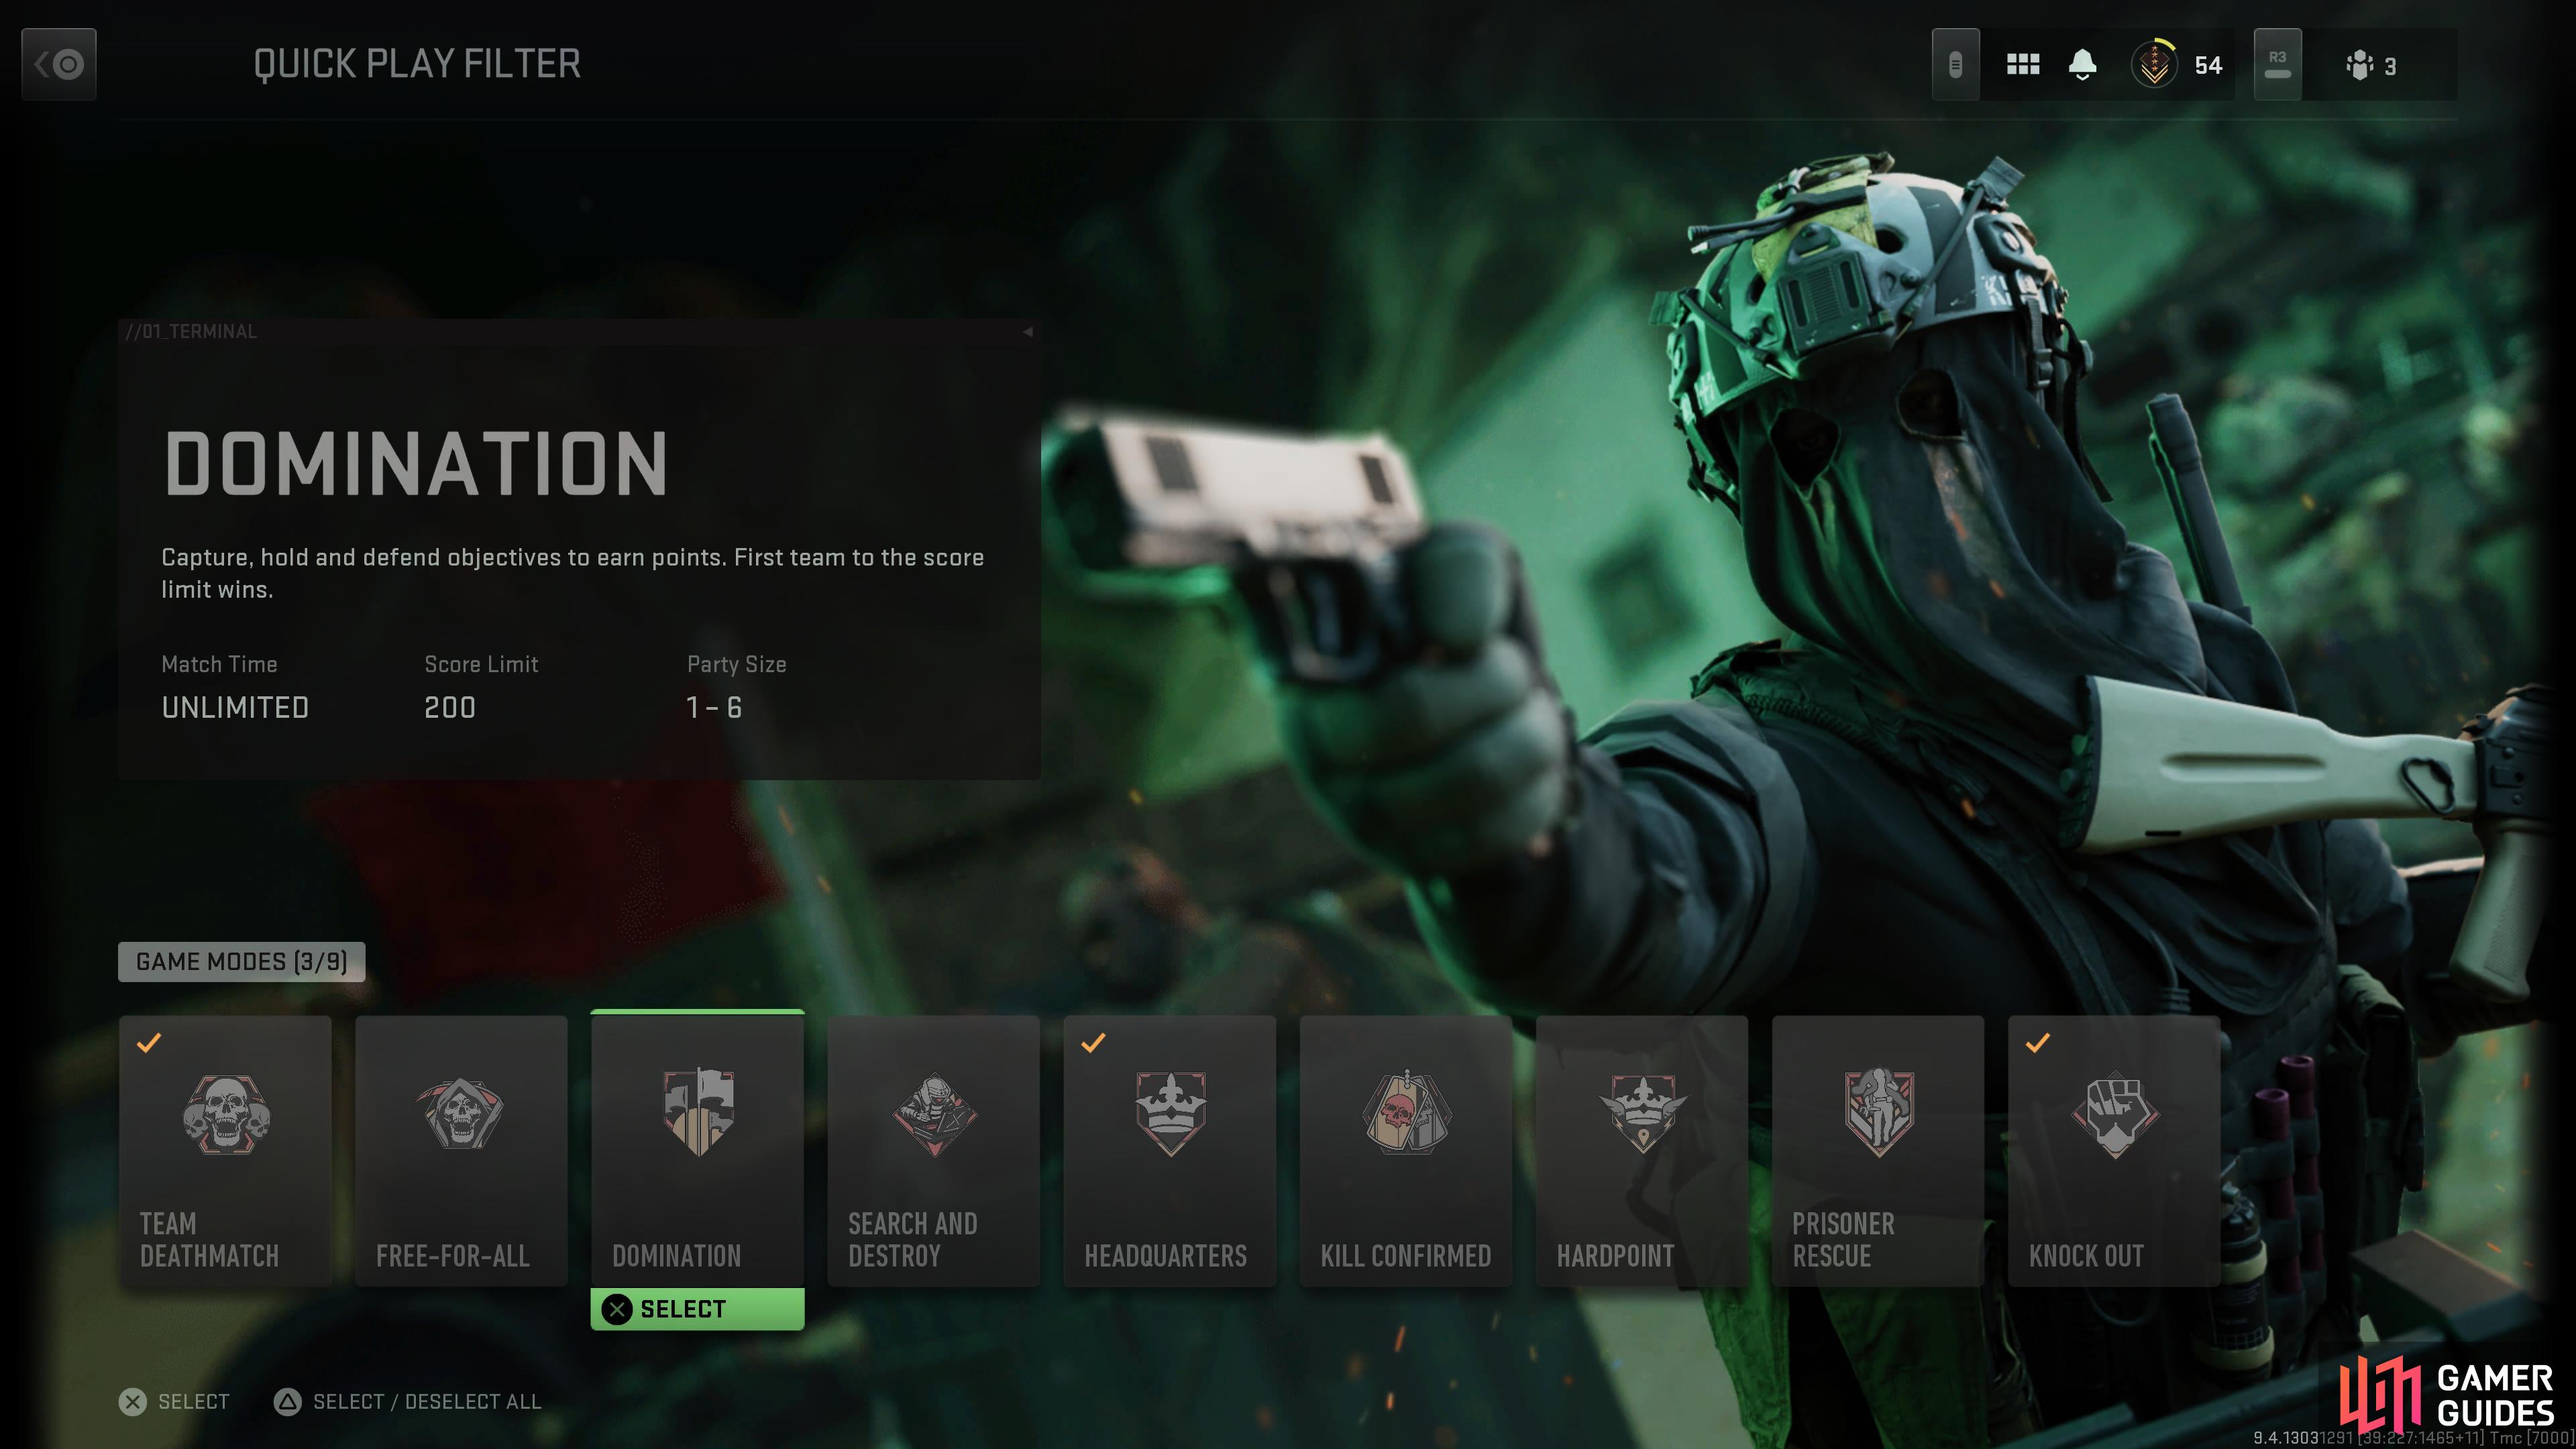 Domination is one of the 13 available Game Modes.